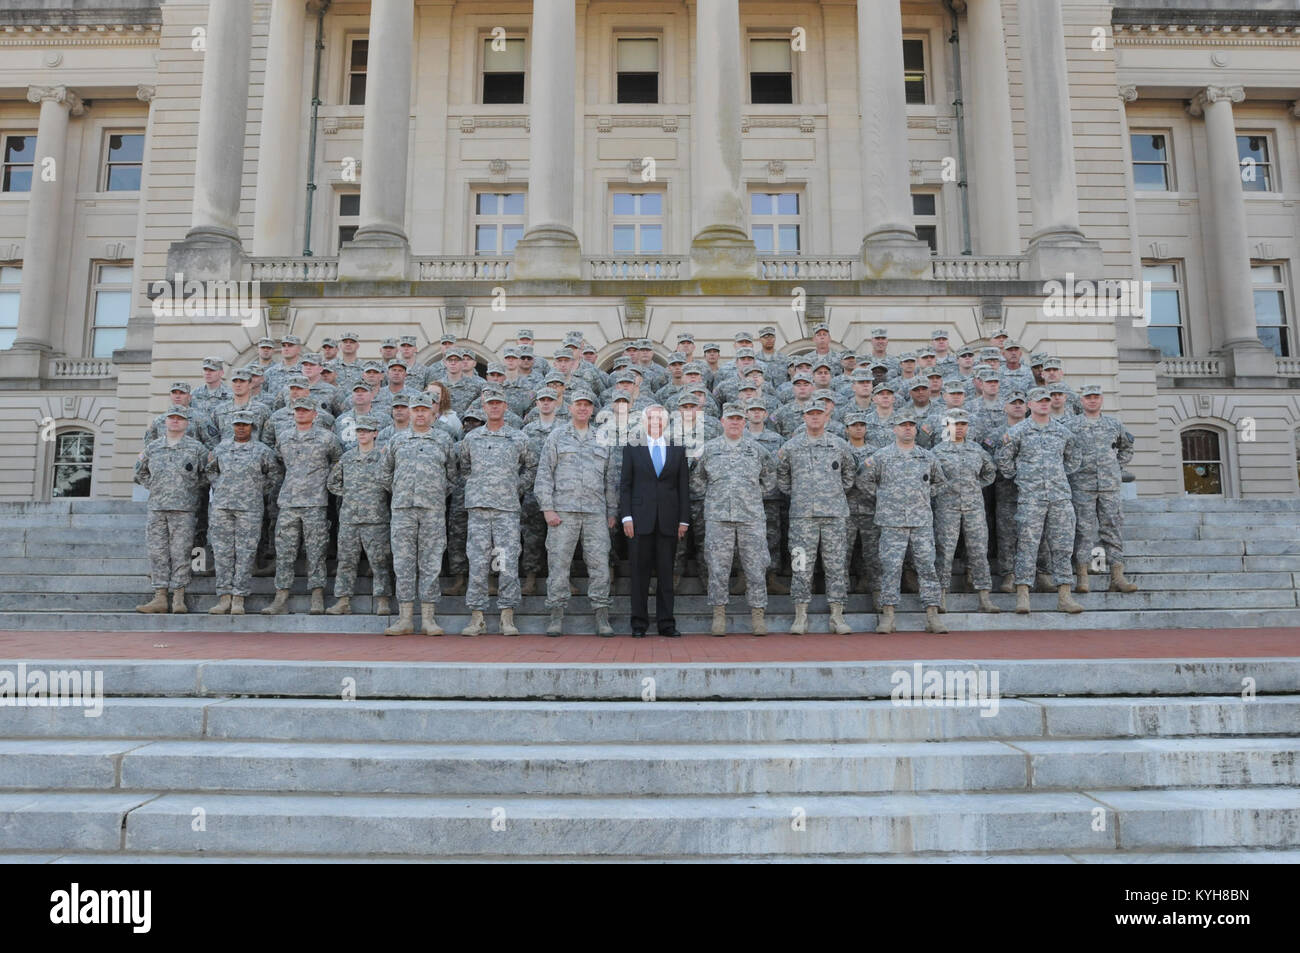 Kentucky Governor, Steve Beshear and the Adjutant General, Maj. Gen. Edward W. Tonini, join recruiters and new Kentucky Guard recruits on the steps of the State Capitol in Frankfort, Ky., Nov. 20, 2012. (Kentucky National Guard photo by Sgt. Scott Raymond) Stock Photo